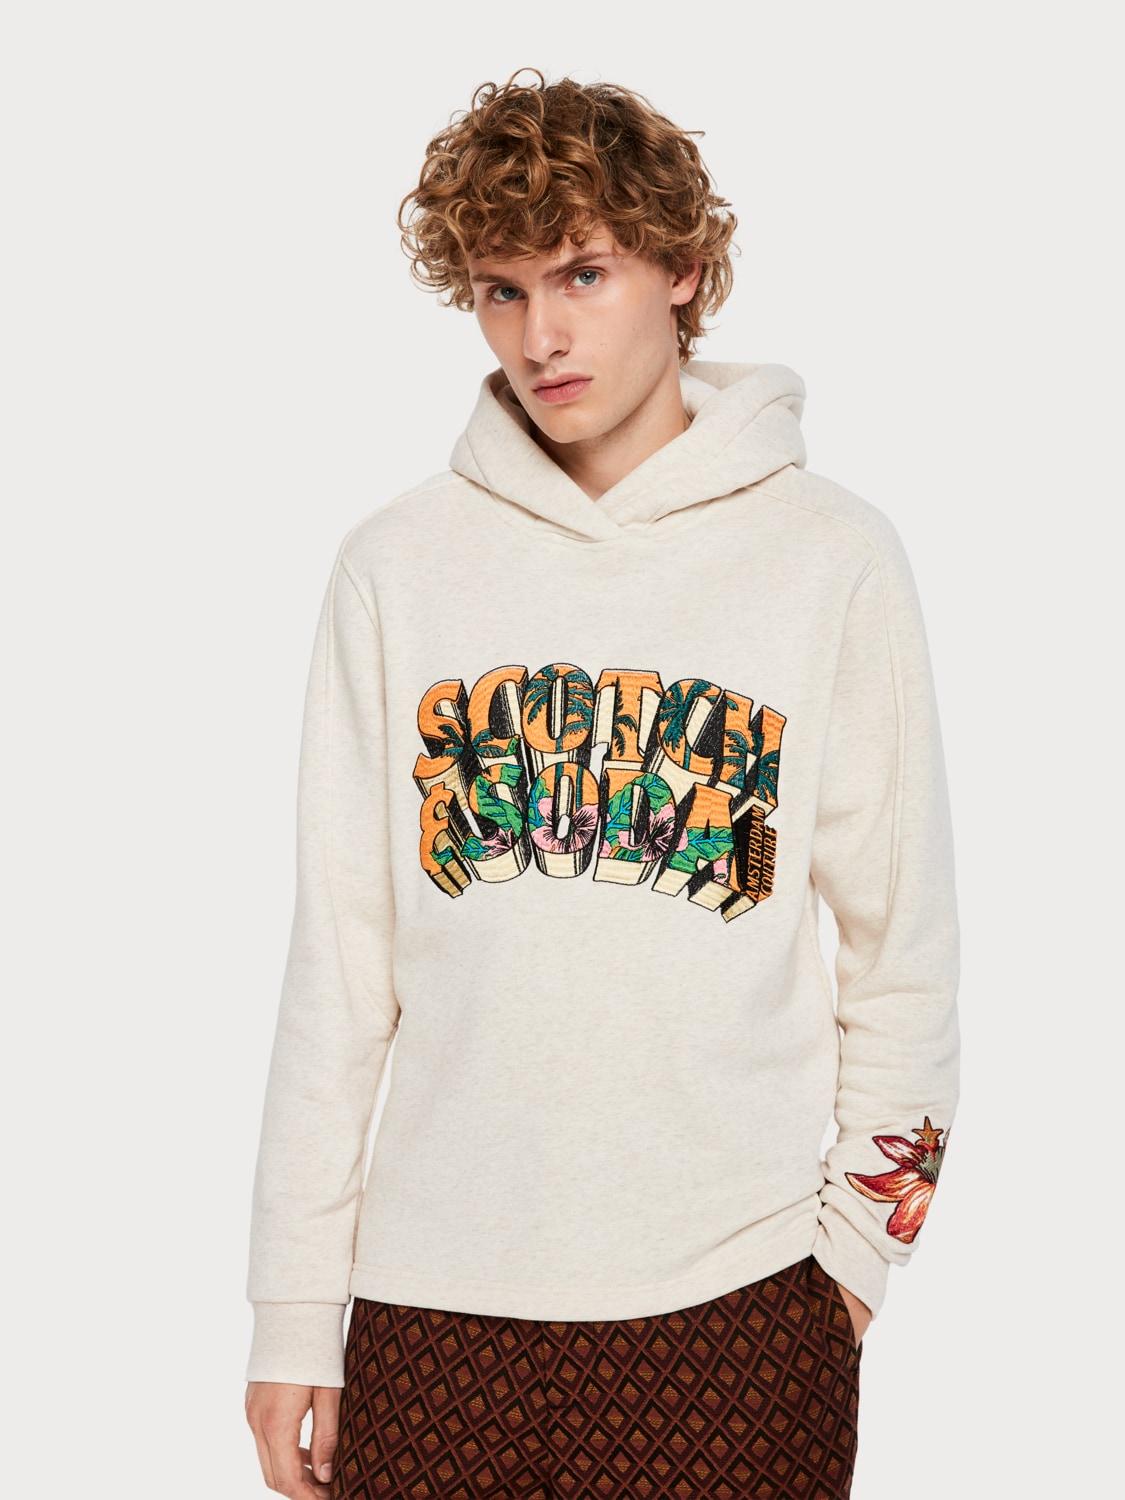 Scotch & Soda Tropical Embroidery Hoodie for Men - Lyst